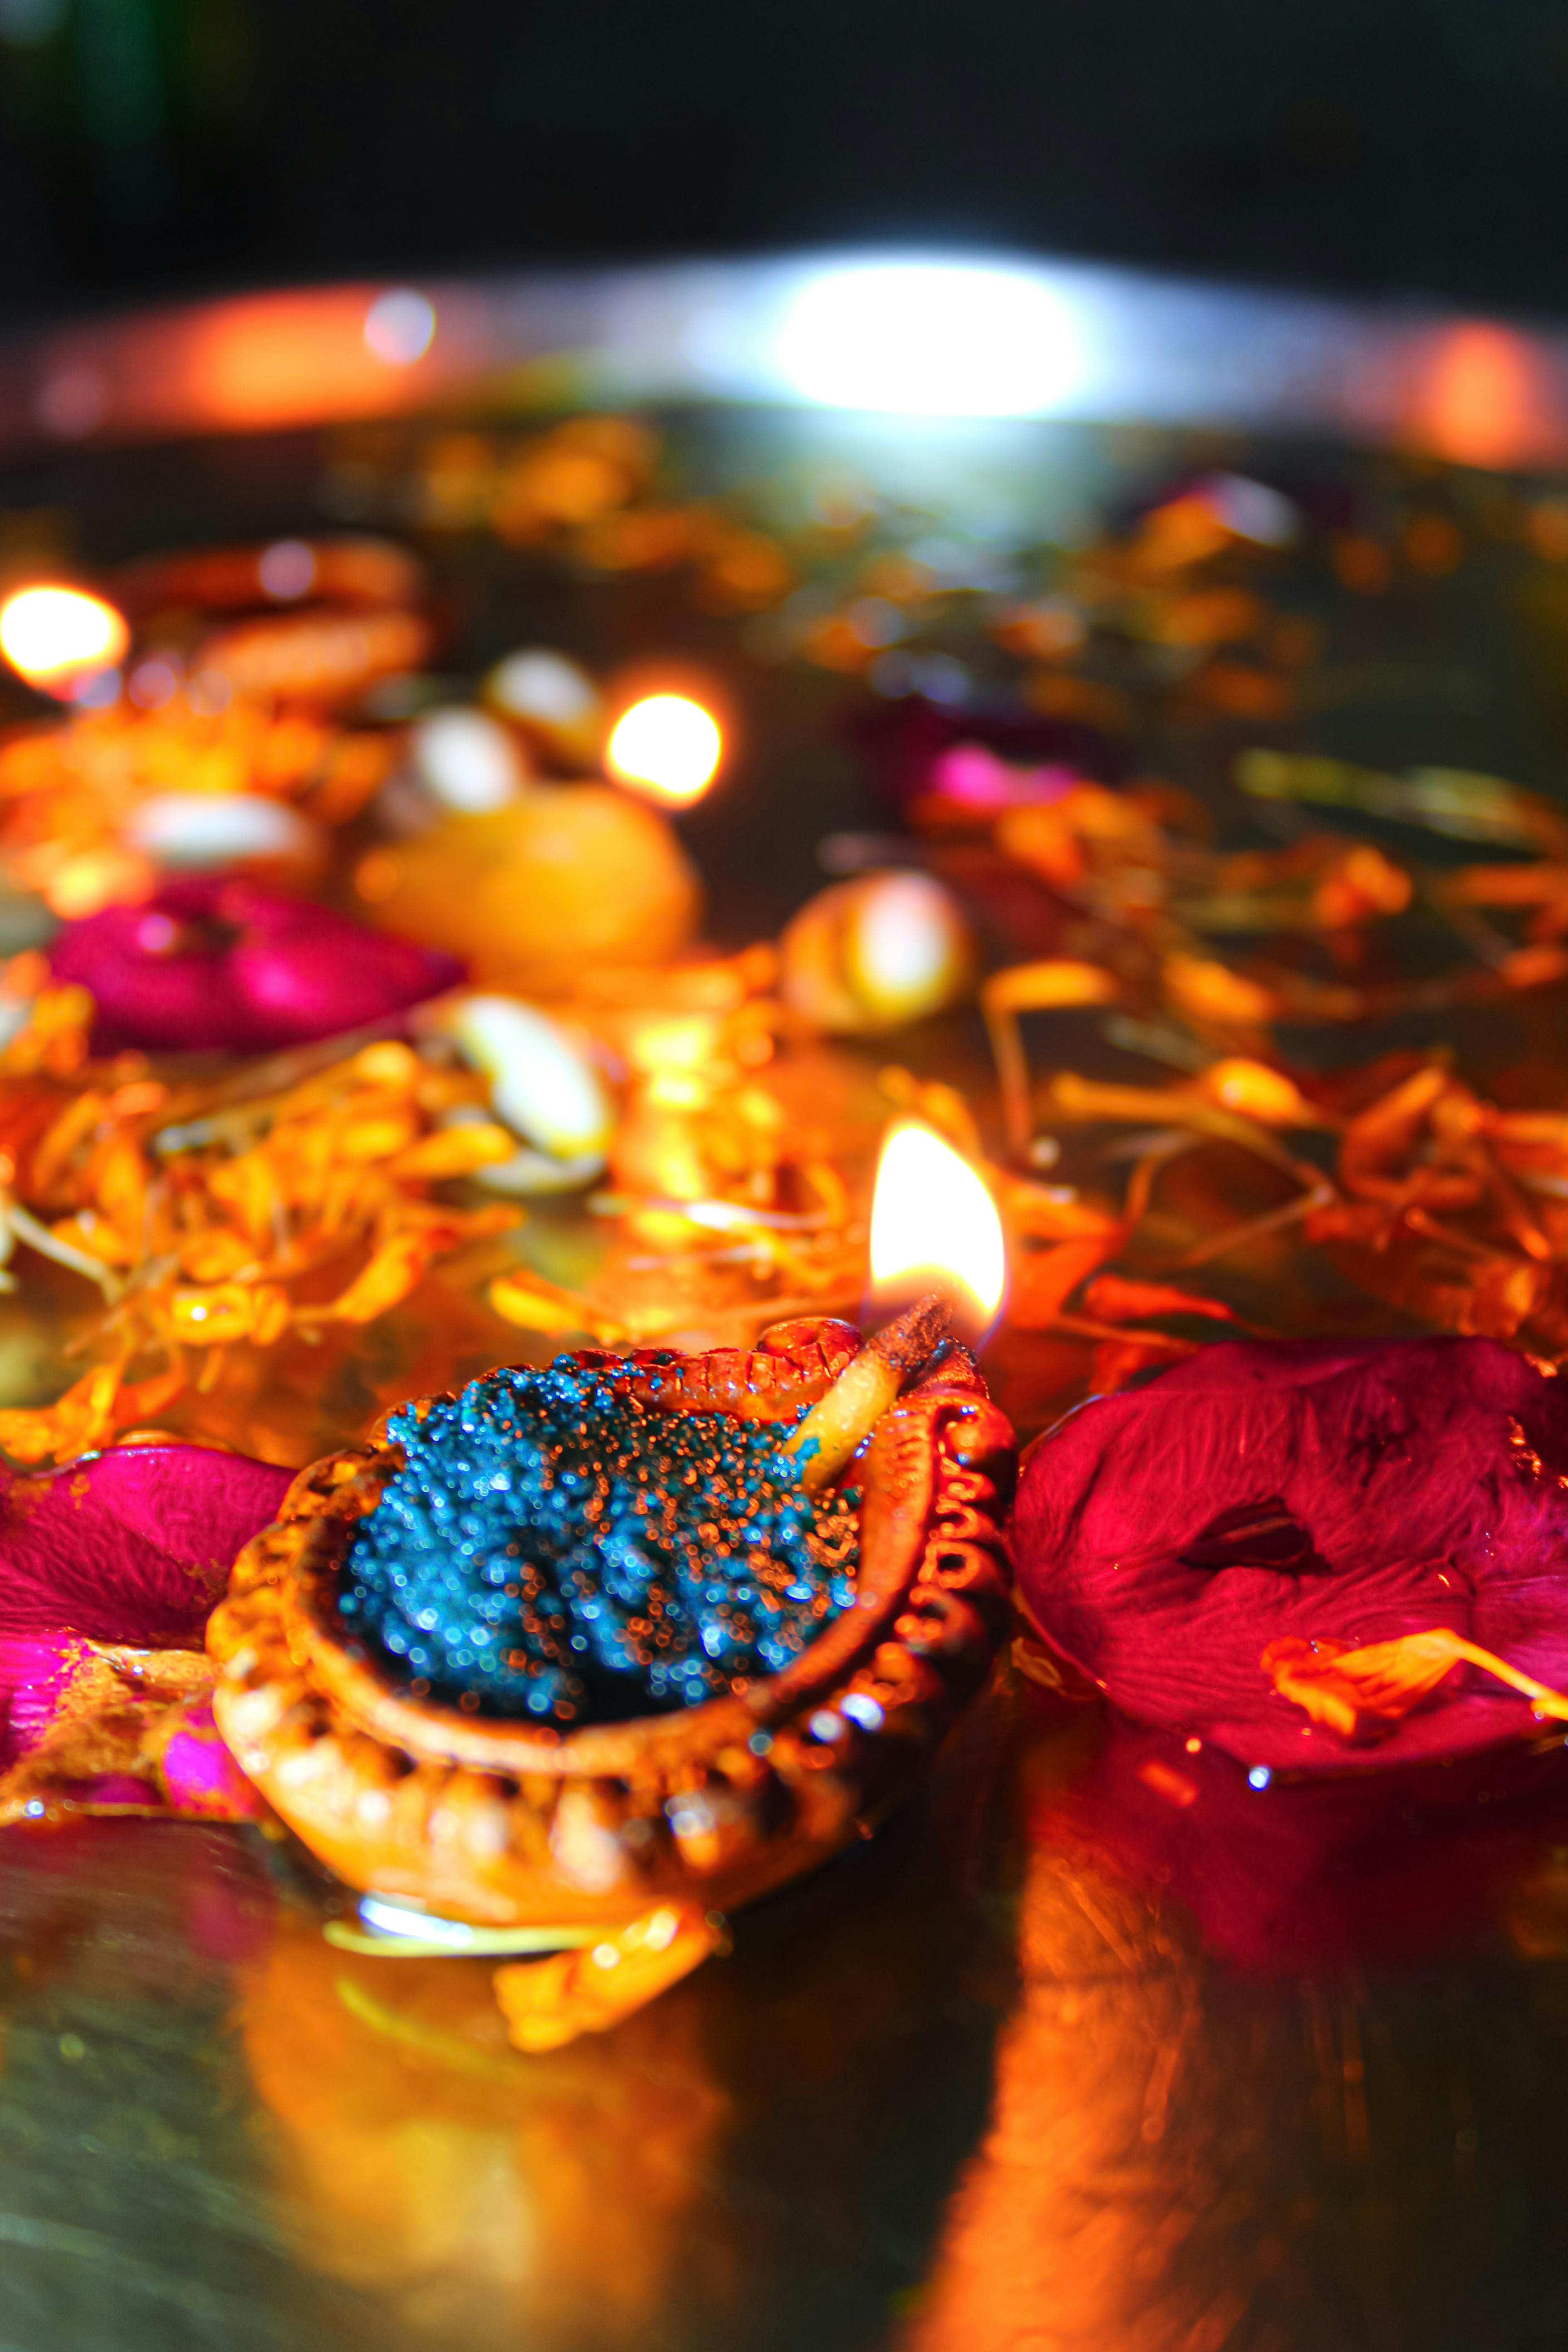 diwali pictures images free download